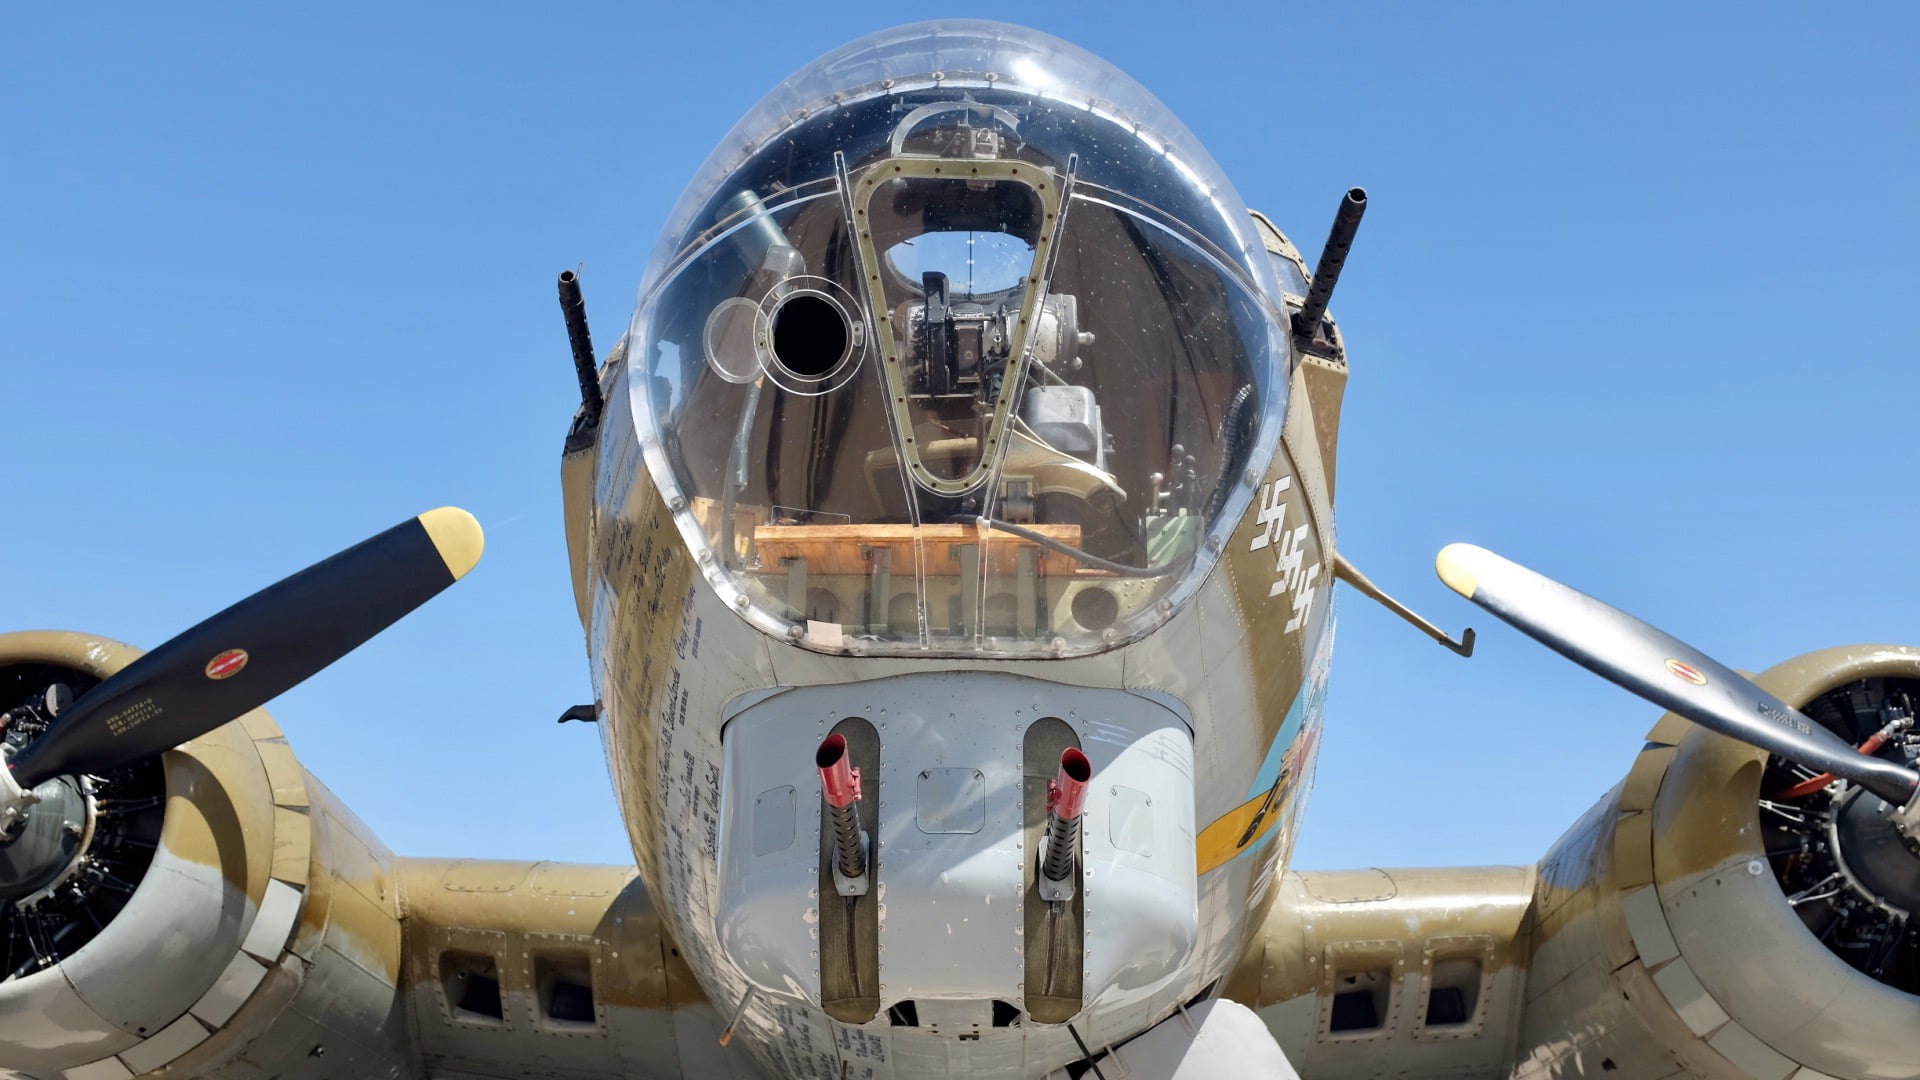 Front view of B-17 Flying Fortress